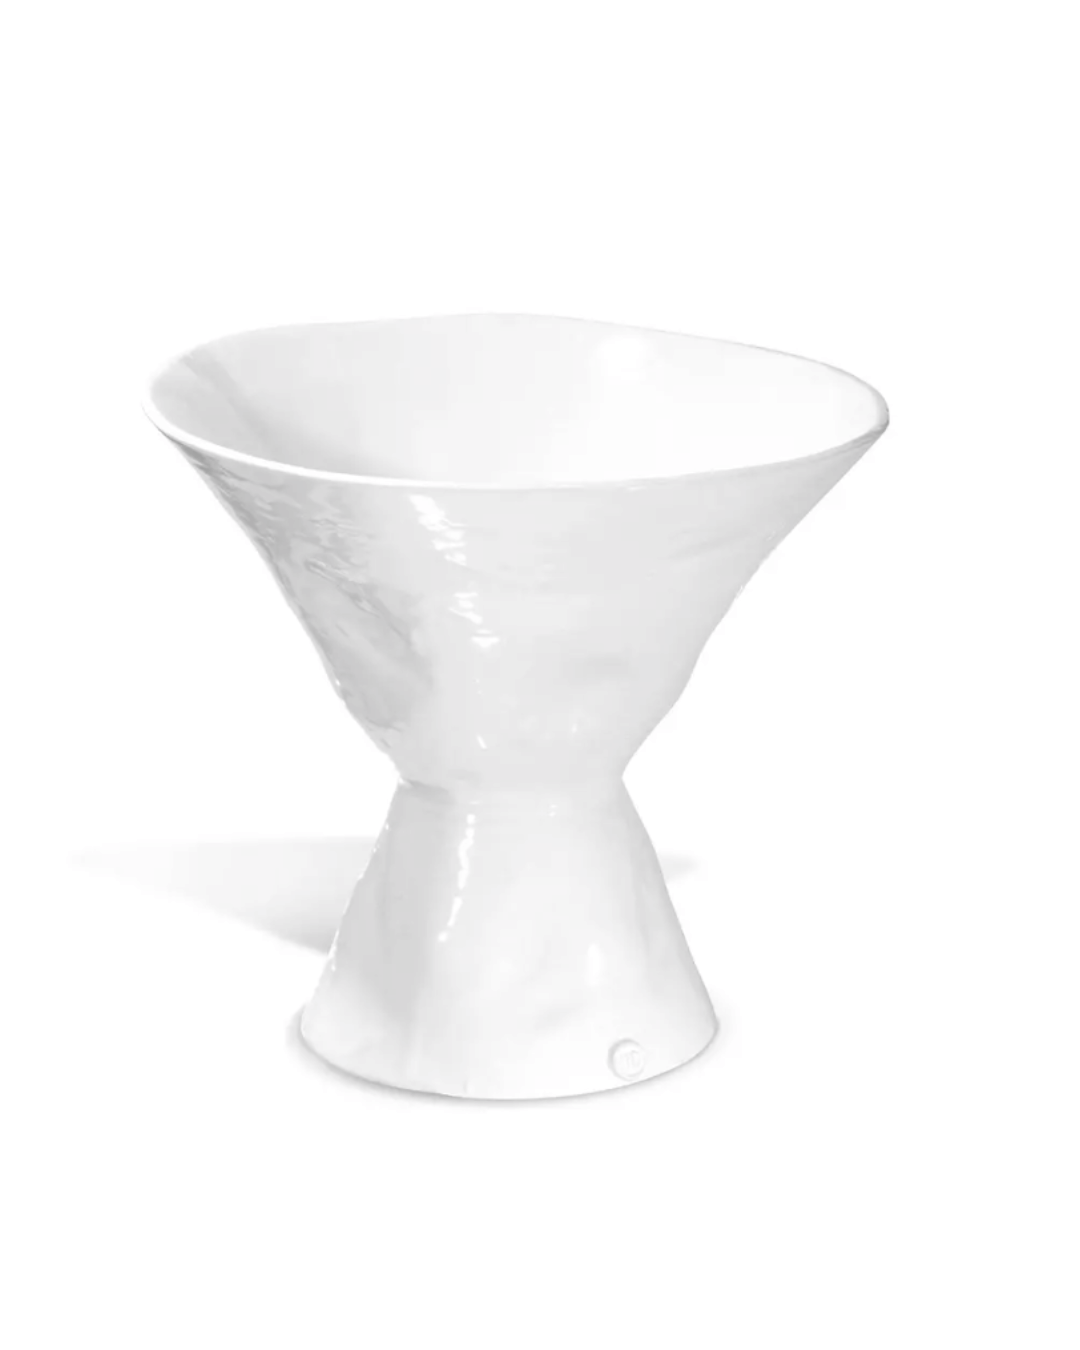 A white, glossy ceramic Catchall Bowl No. 979 from Montes Doggett with a unique, inverted cone shape, evoking the style of a Scottsdale Arizona bungalow, on a plain white background.